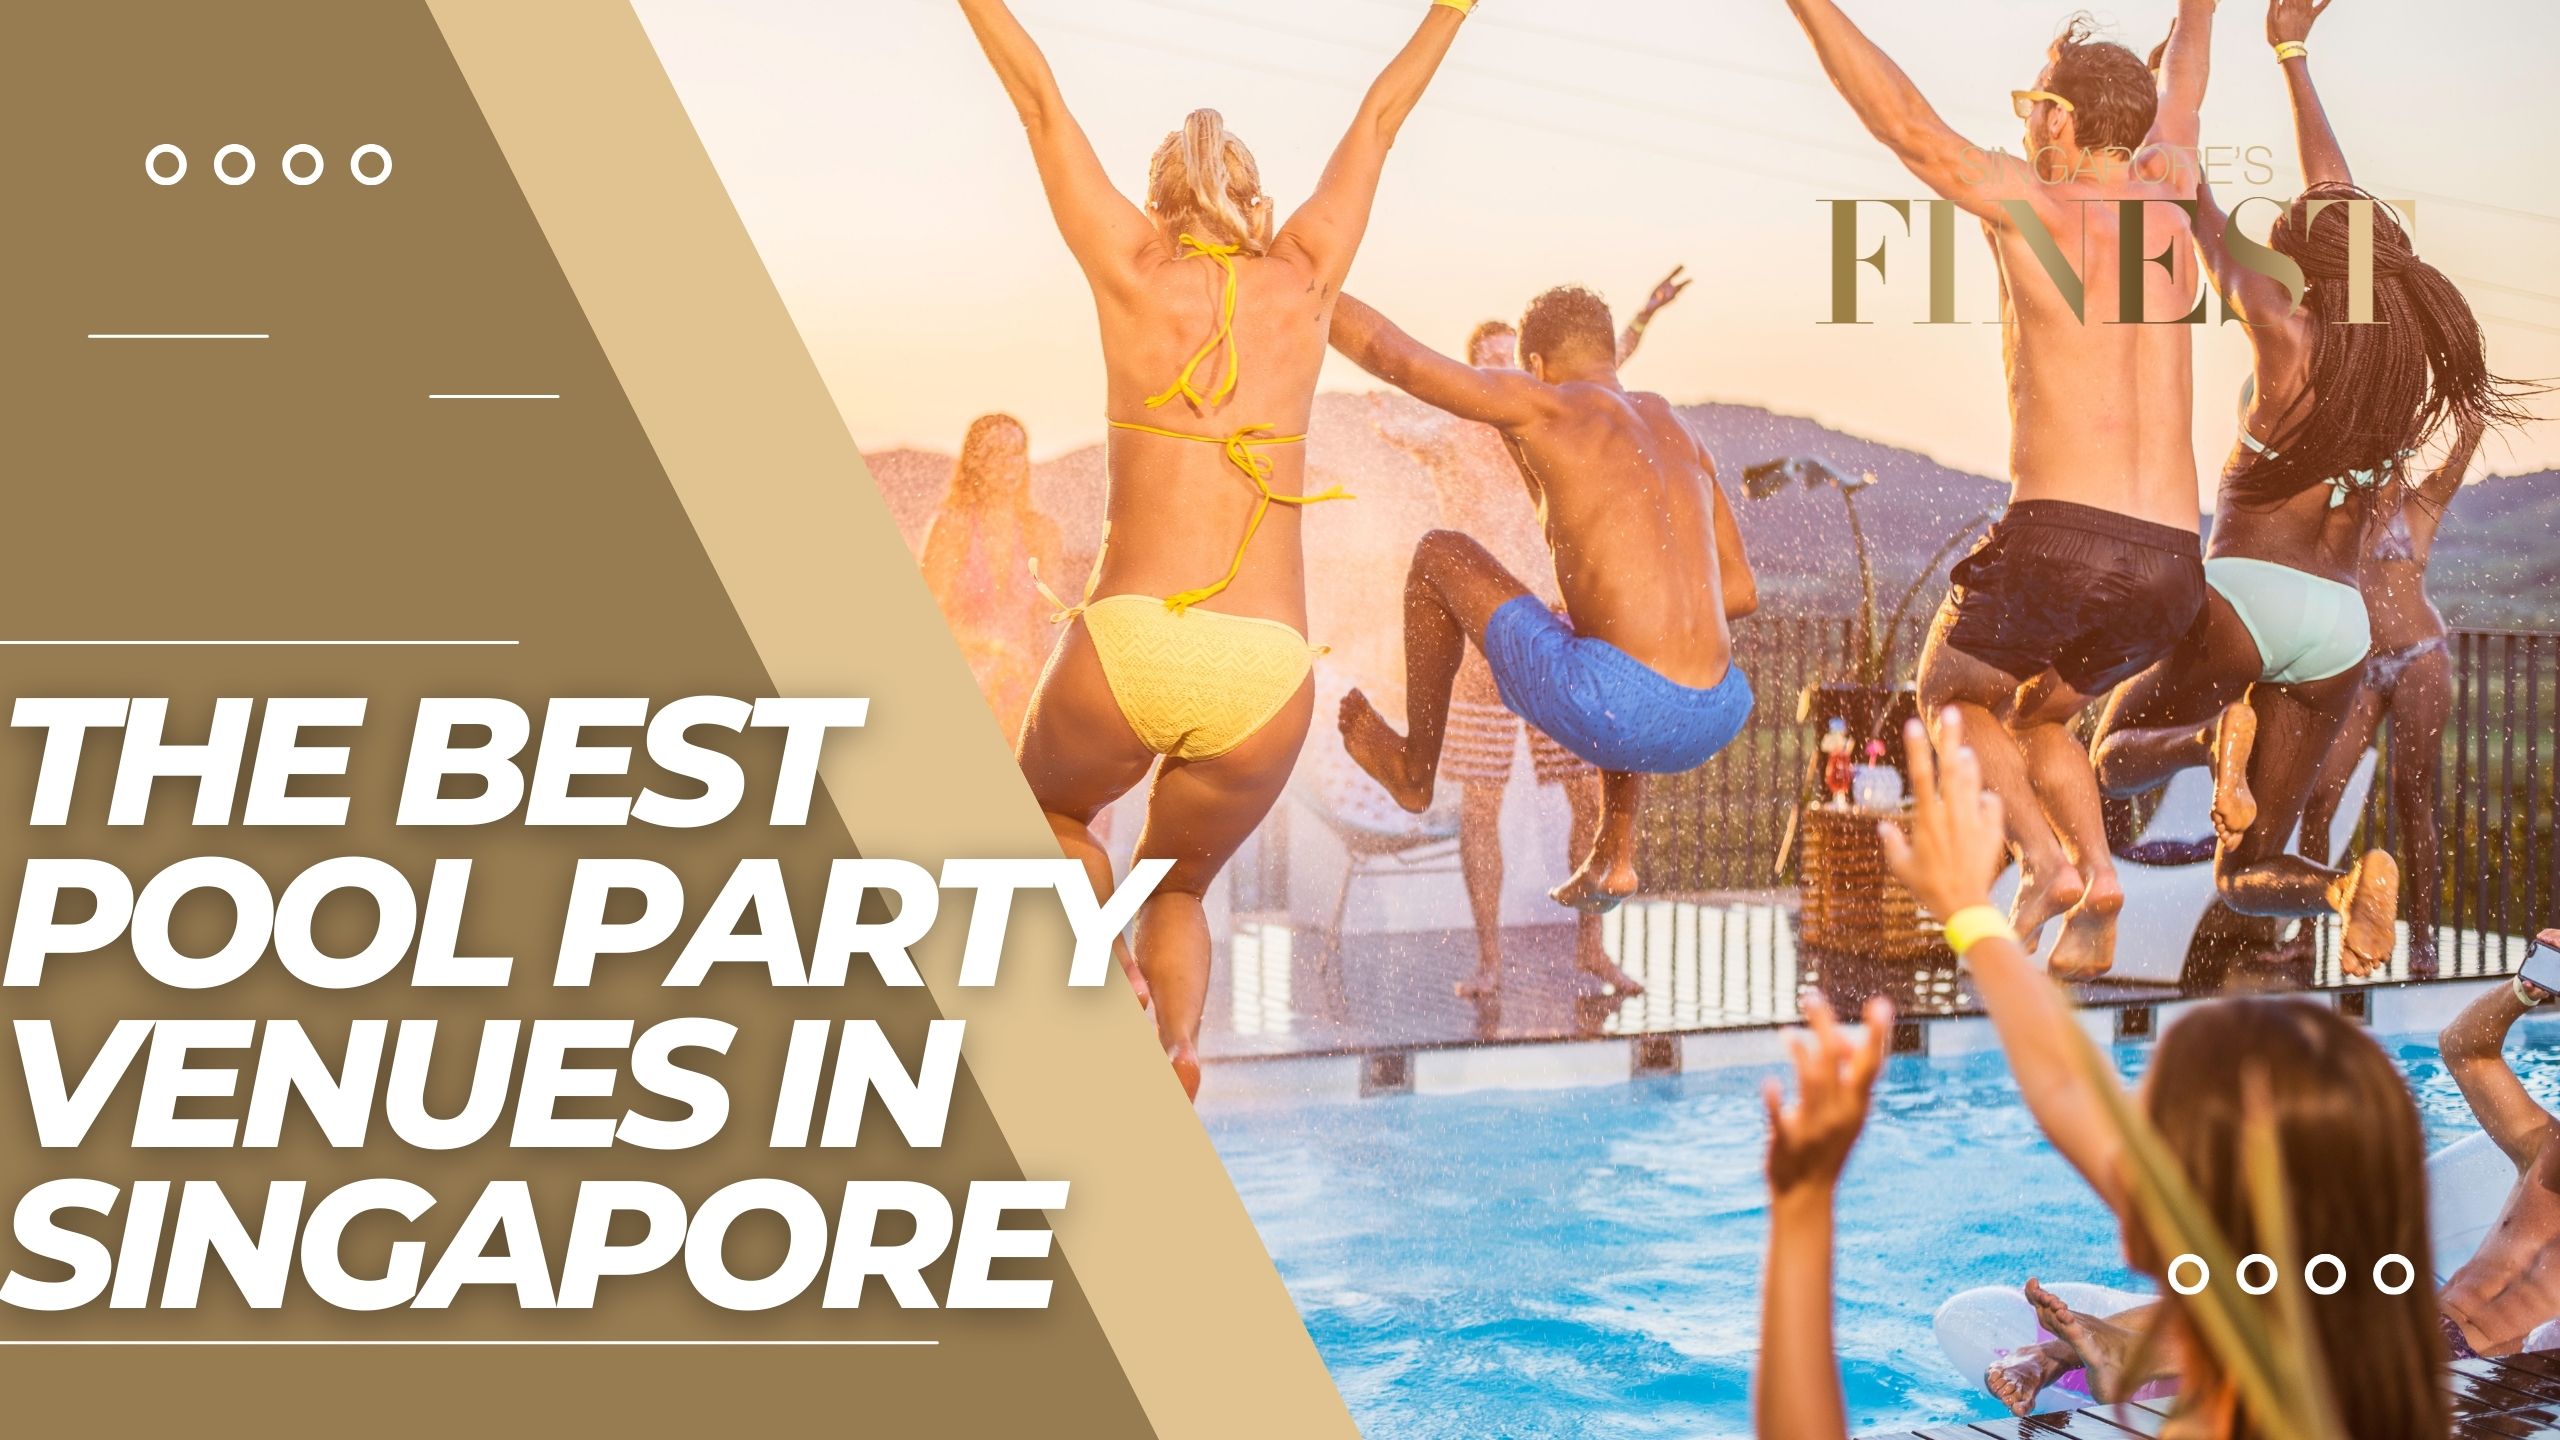 The Finest Pool Party Venues in Singapore